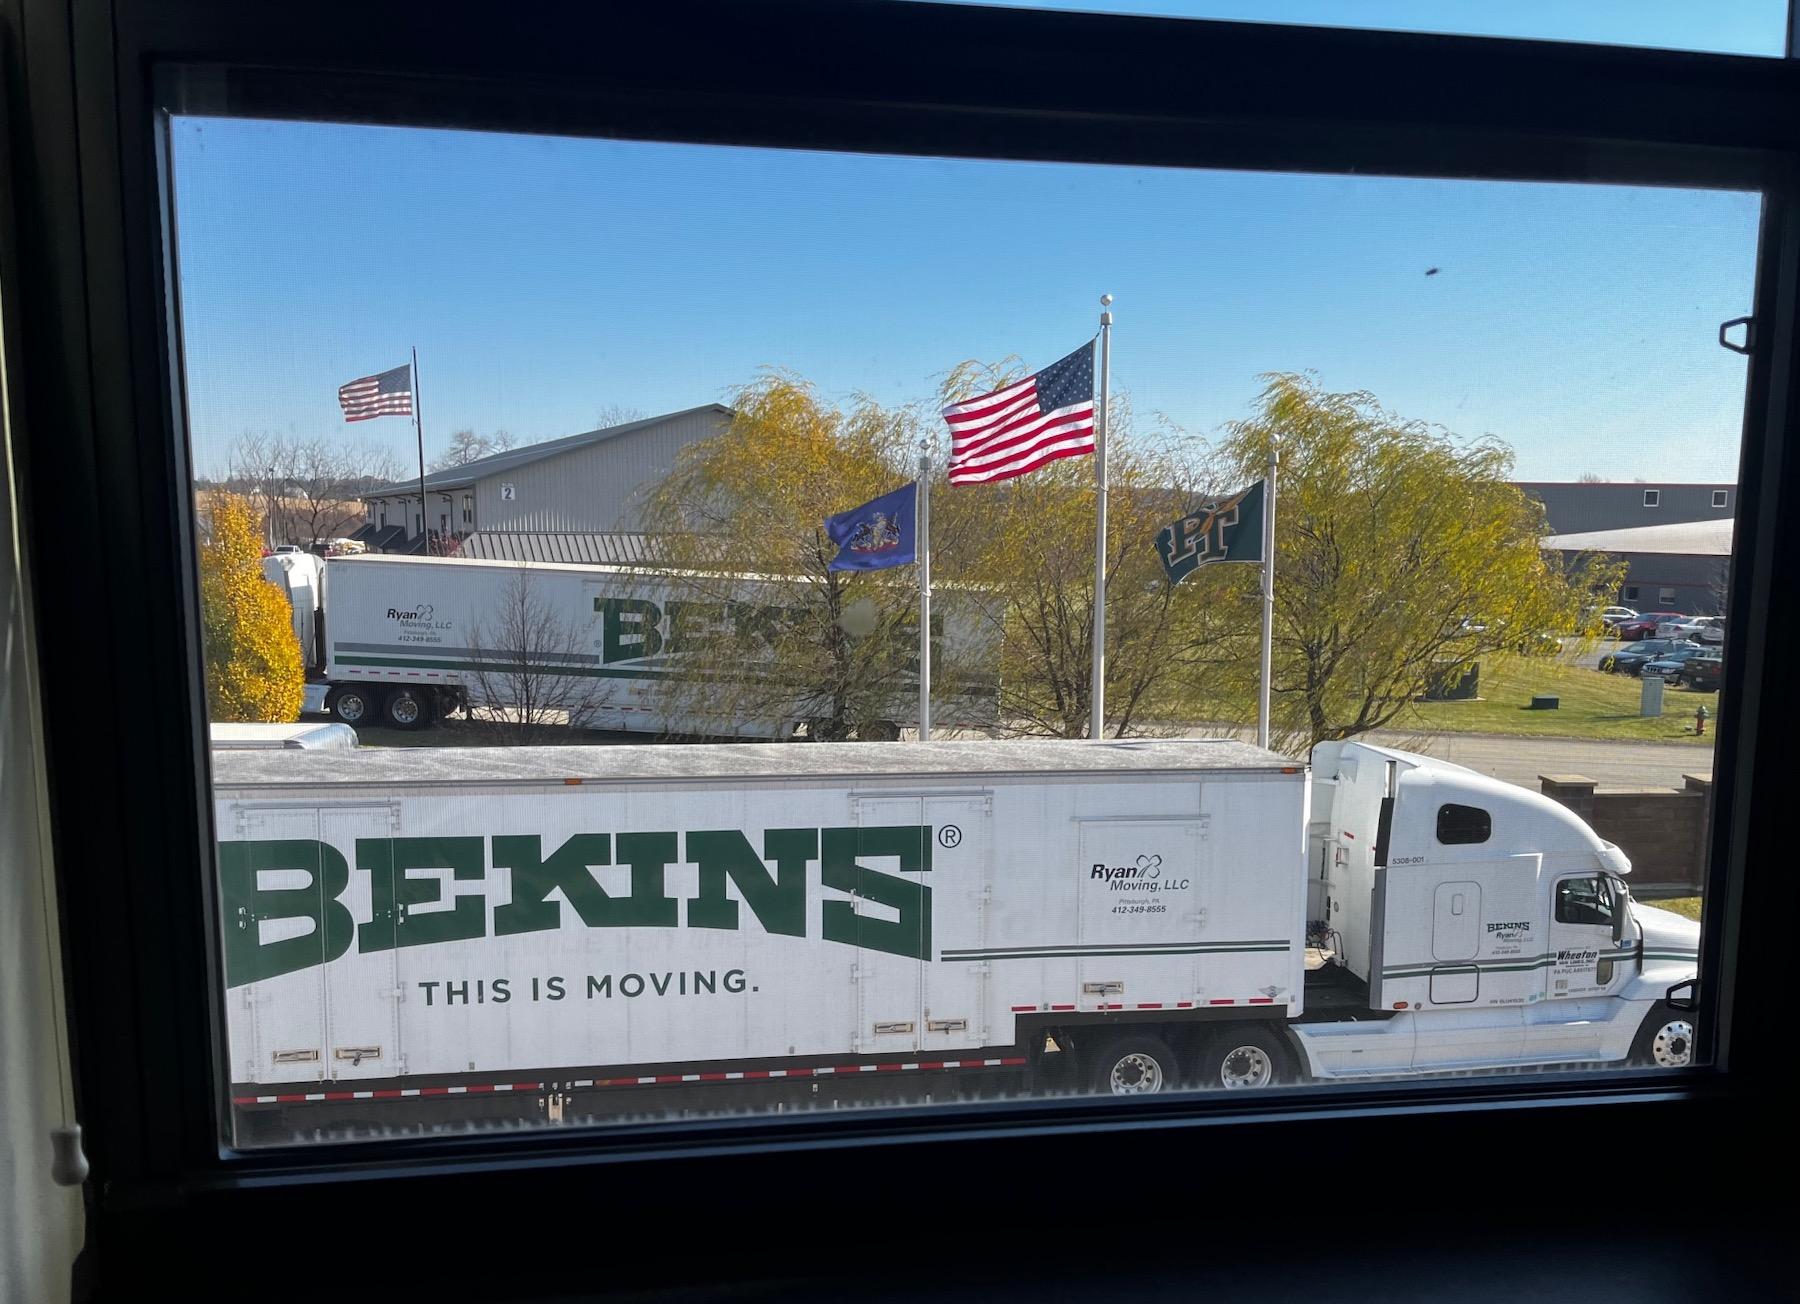 On moving day, the view from an office window framed the flags and the moving trucks